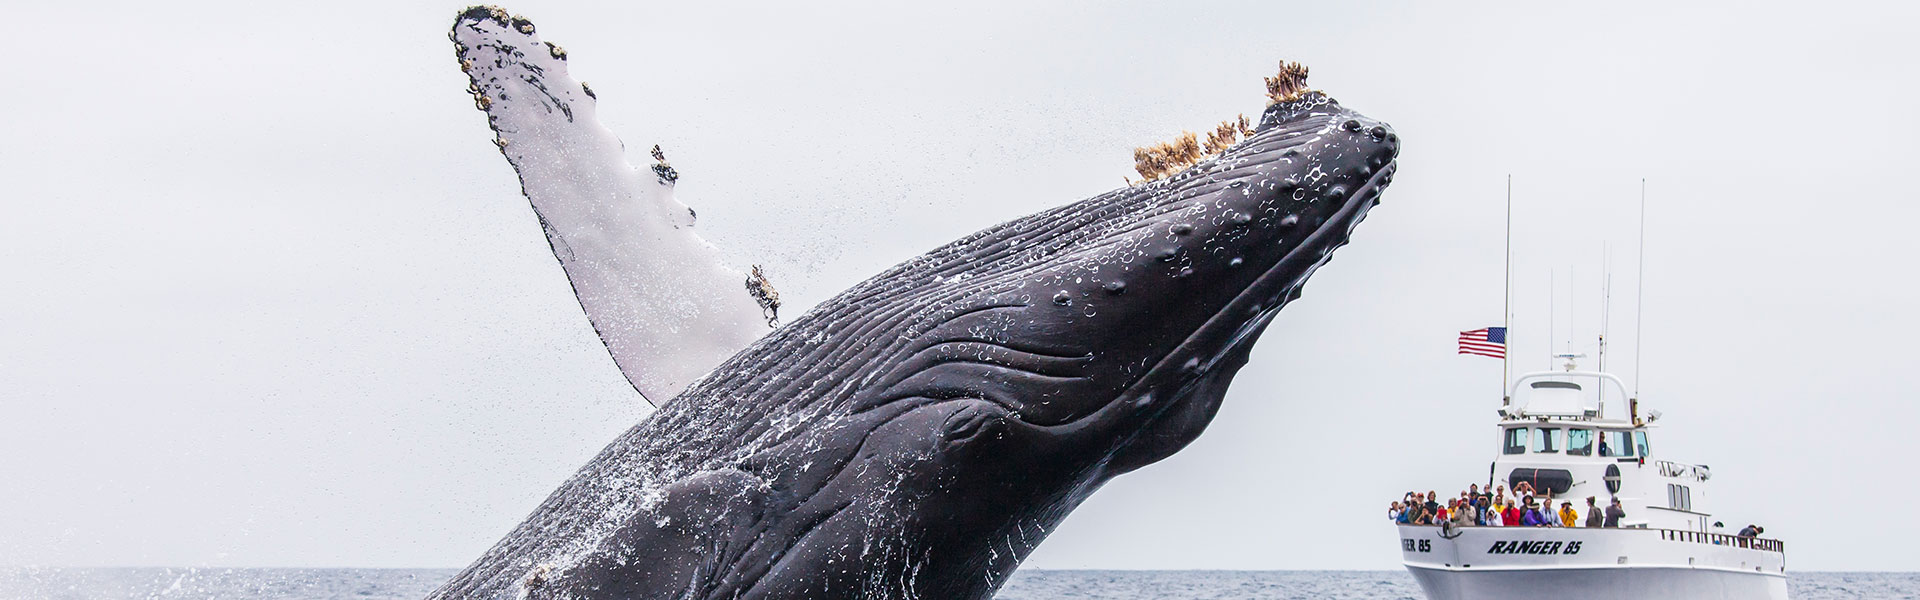 A humpback whale leaps breaches the water, a whale-watching vessel in the background